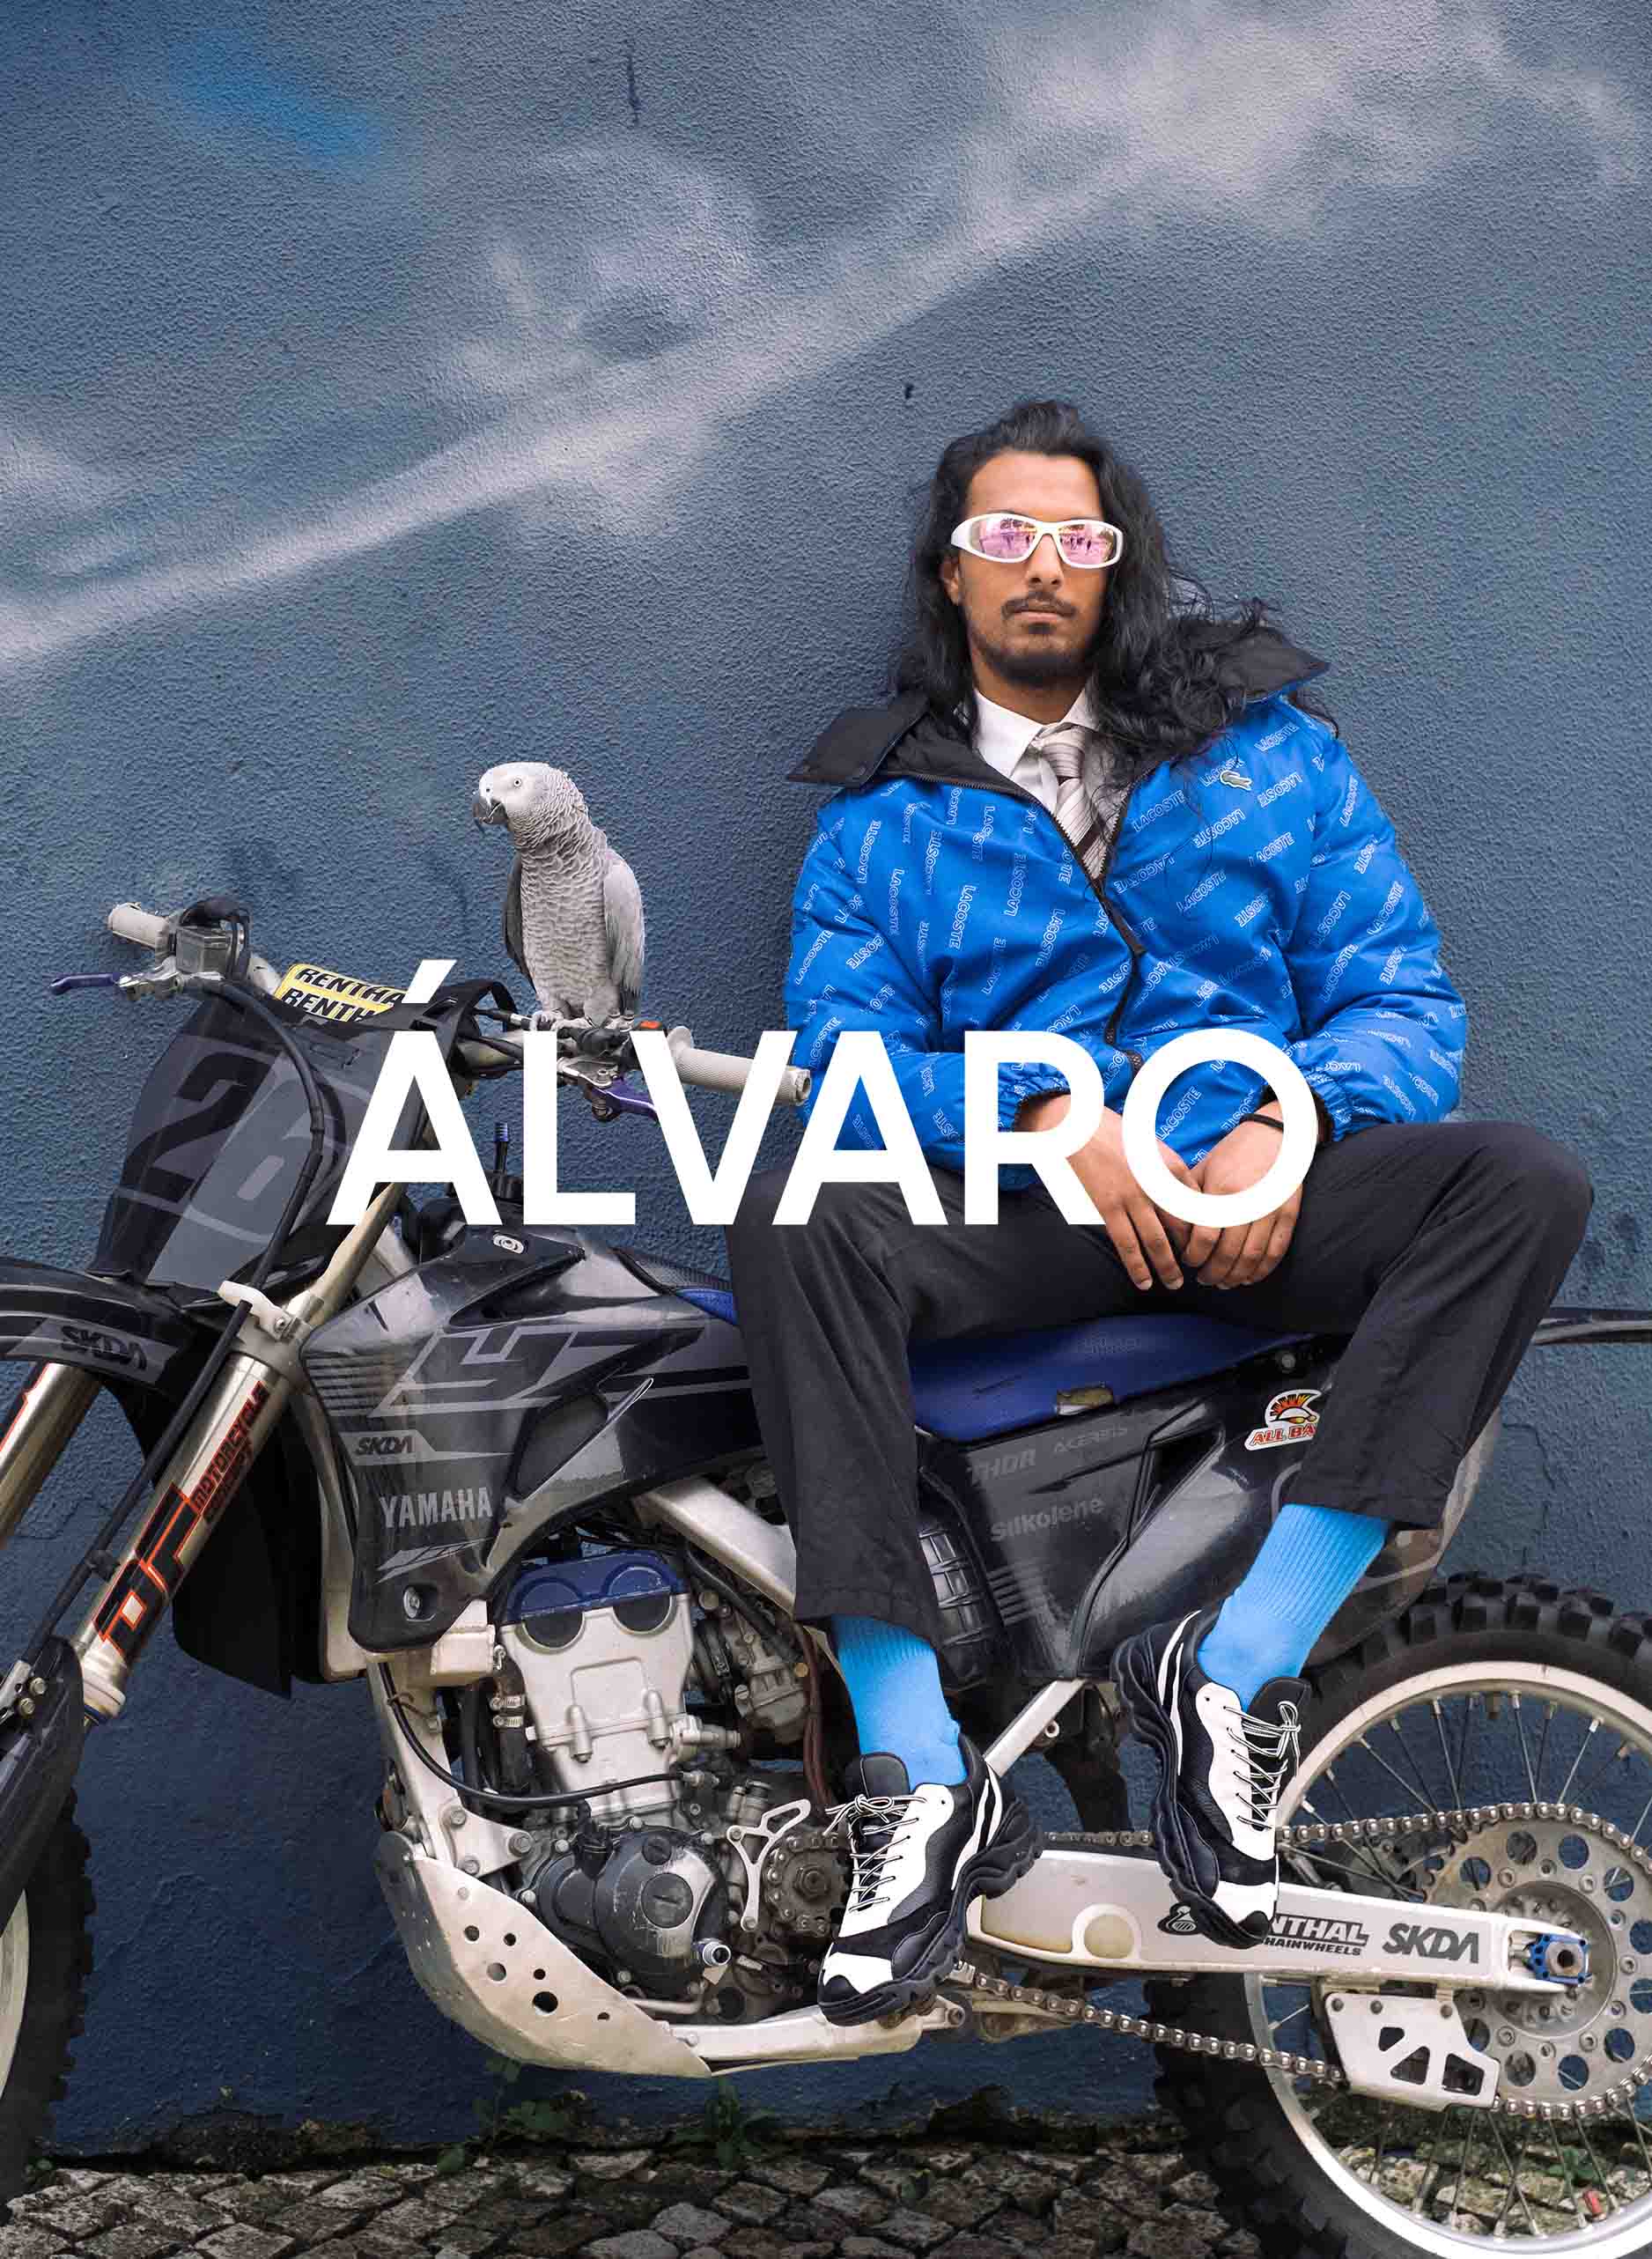 A man called Álvaro sitting on a motorcycle with a bird, wearing Diverge sneakers, promoting custom shoes and social impact throught the imagine project.